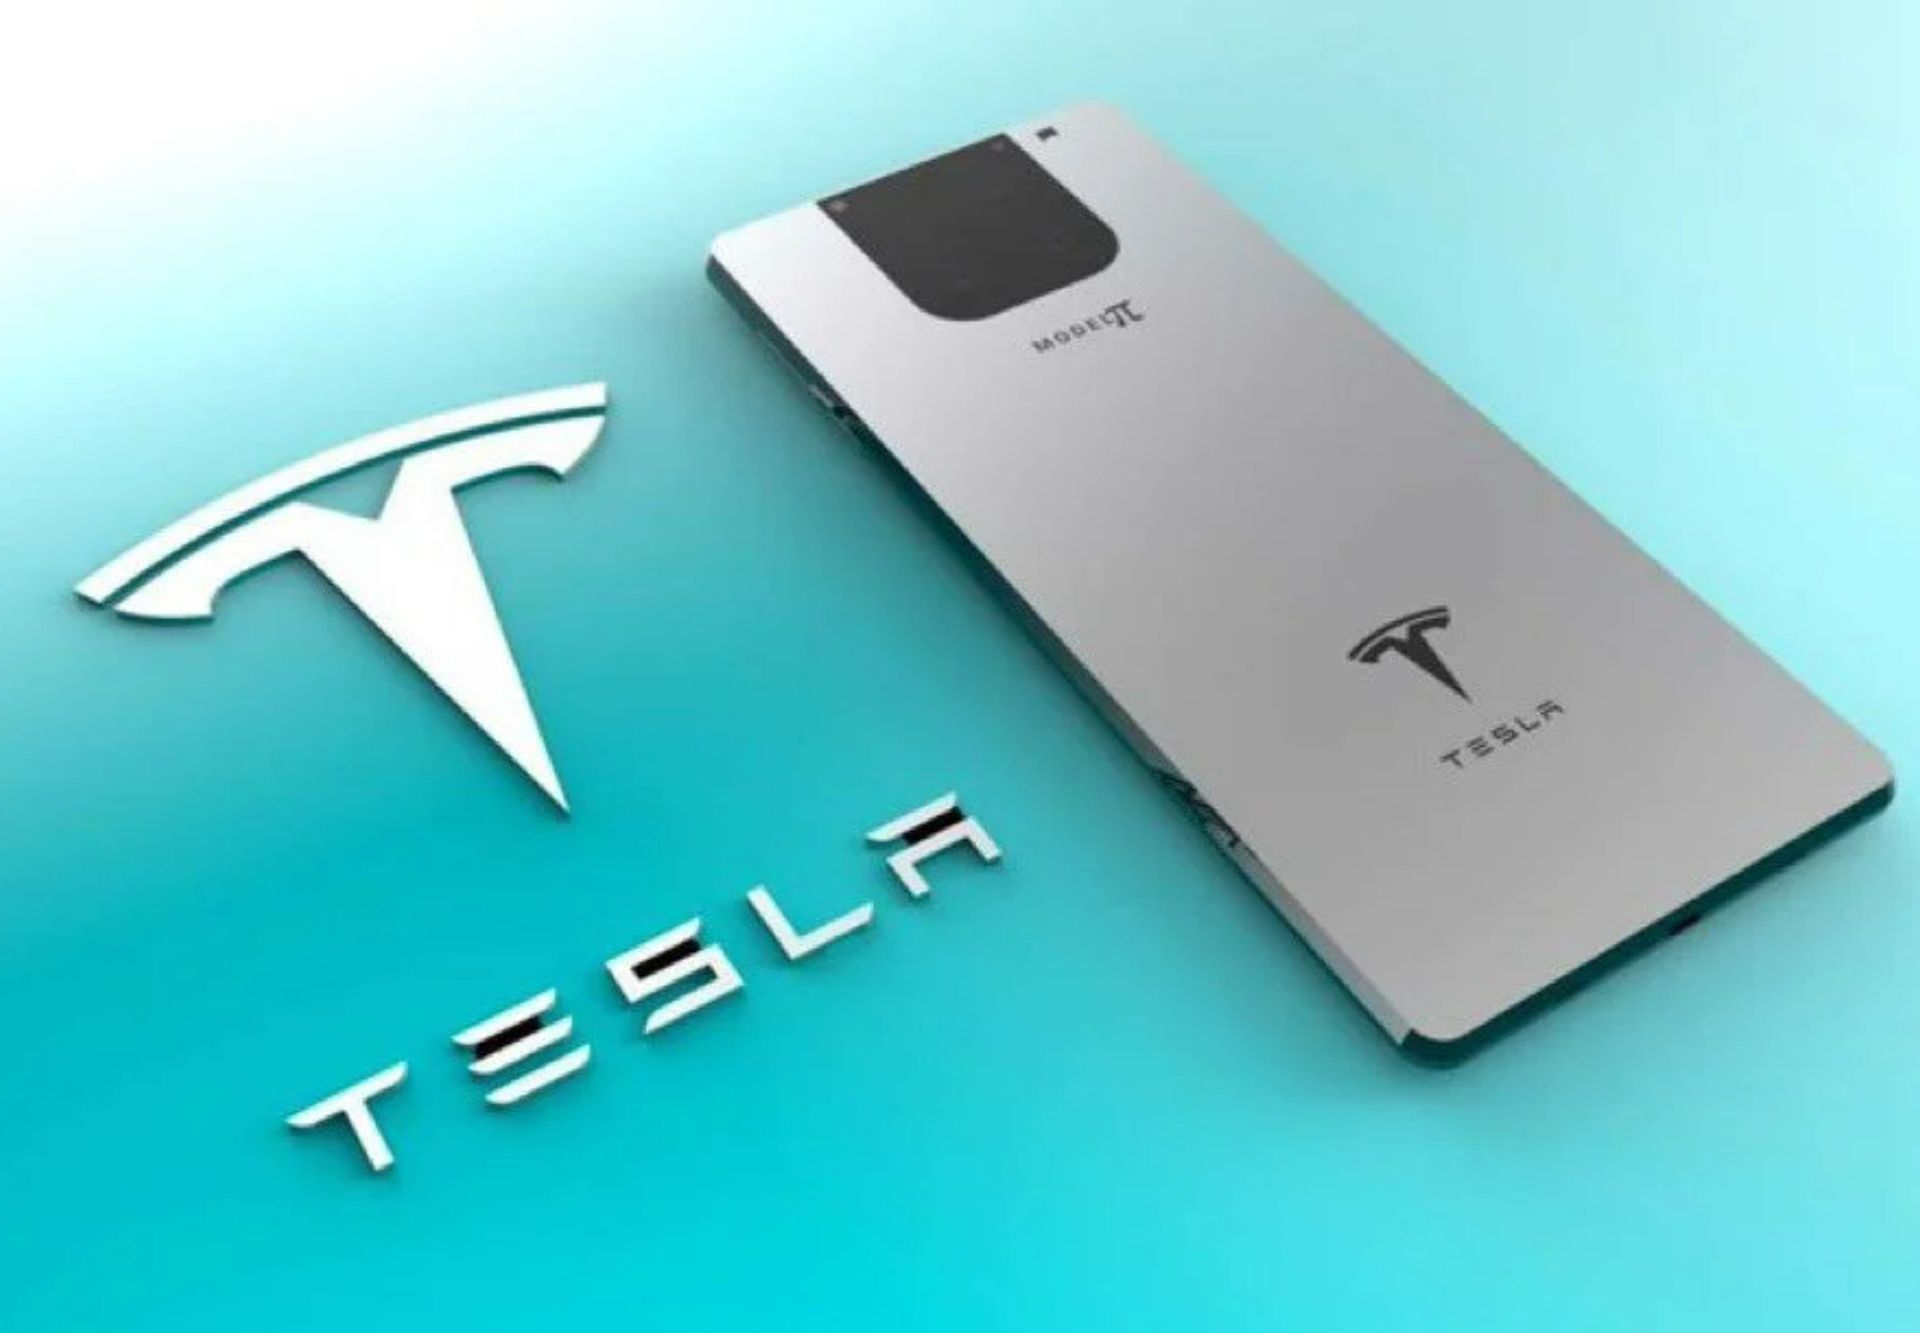 Elon Musk to Launch Tesla Pi Phone, The Reality Behind